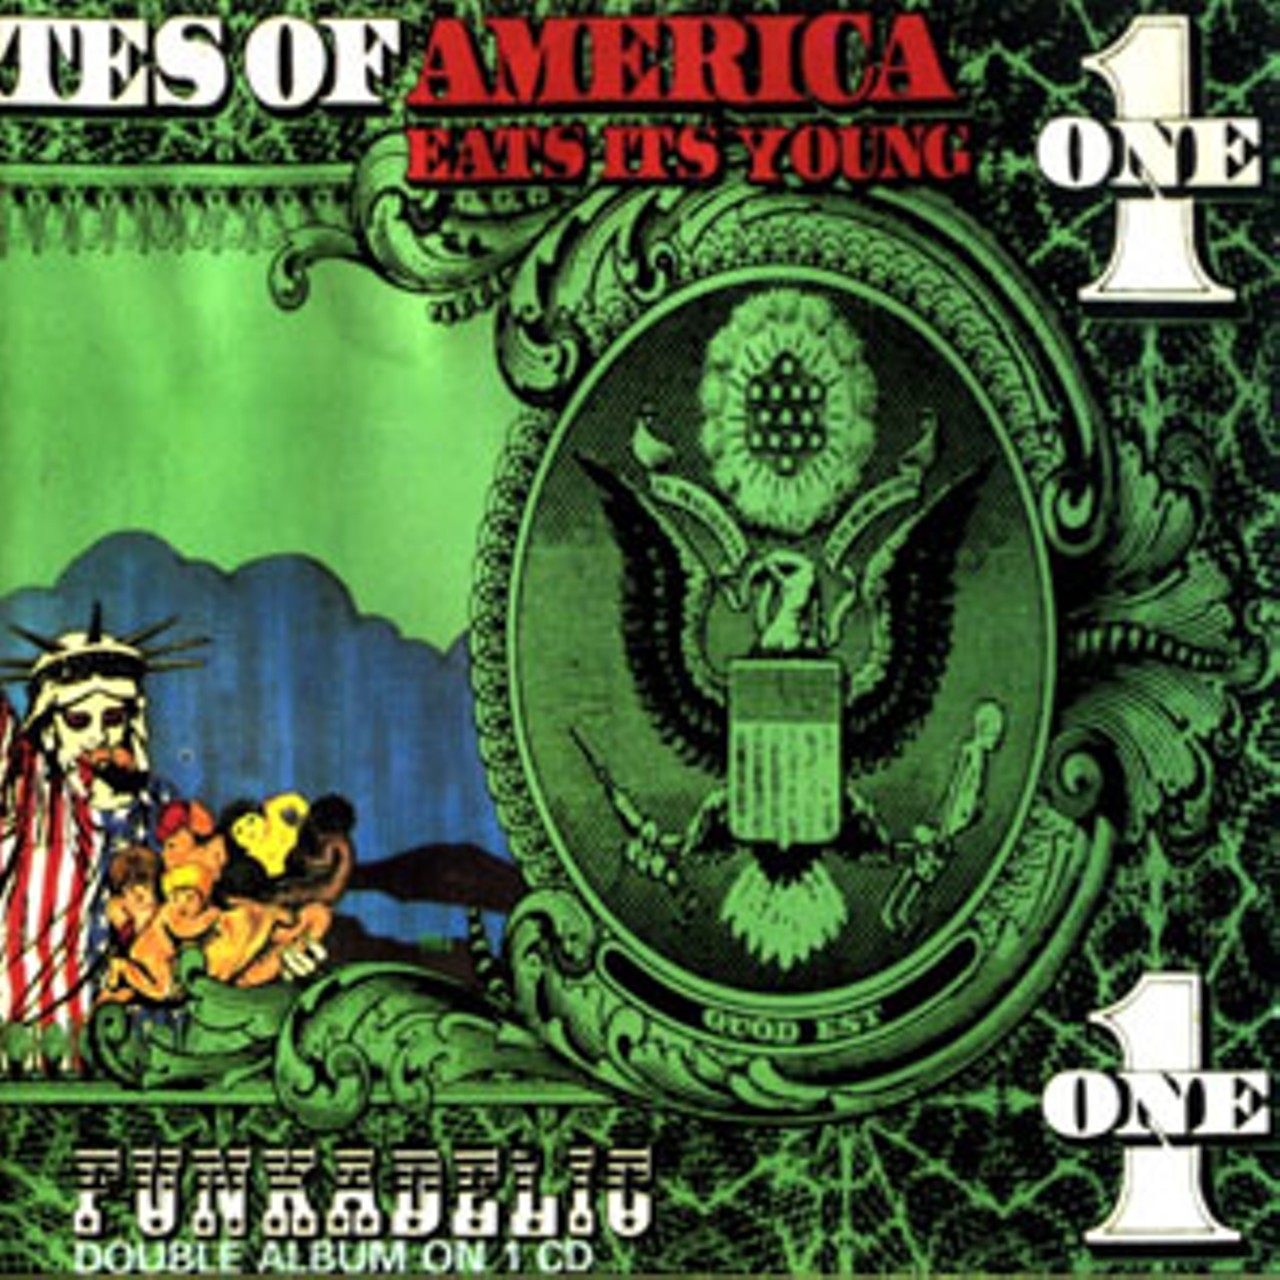 7. Yum yum. A ravenous Statue of Liberty snacks on some multi-racial babes on Funkadelic's aptly-titled "America Eats Its Young." We like the greenery on this cover - few things are more American than greed.